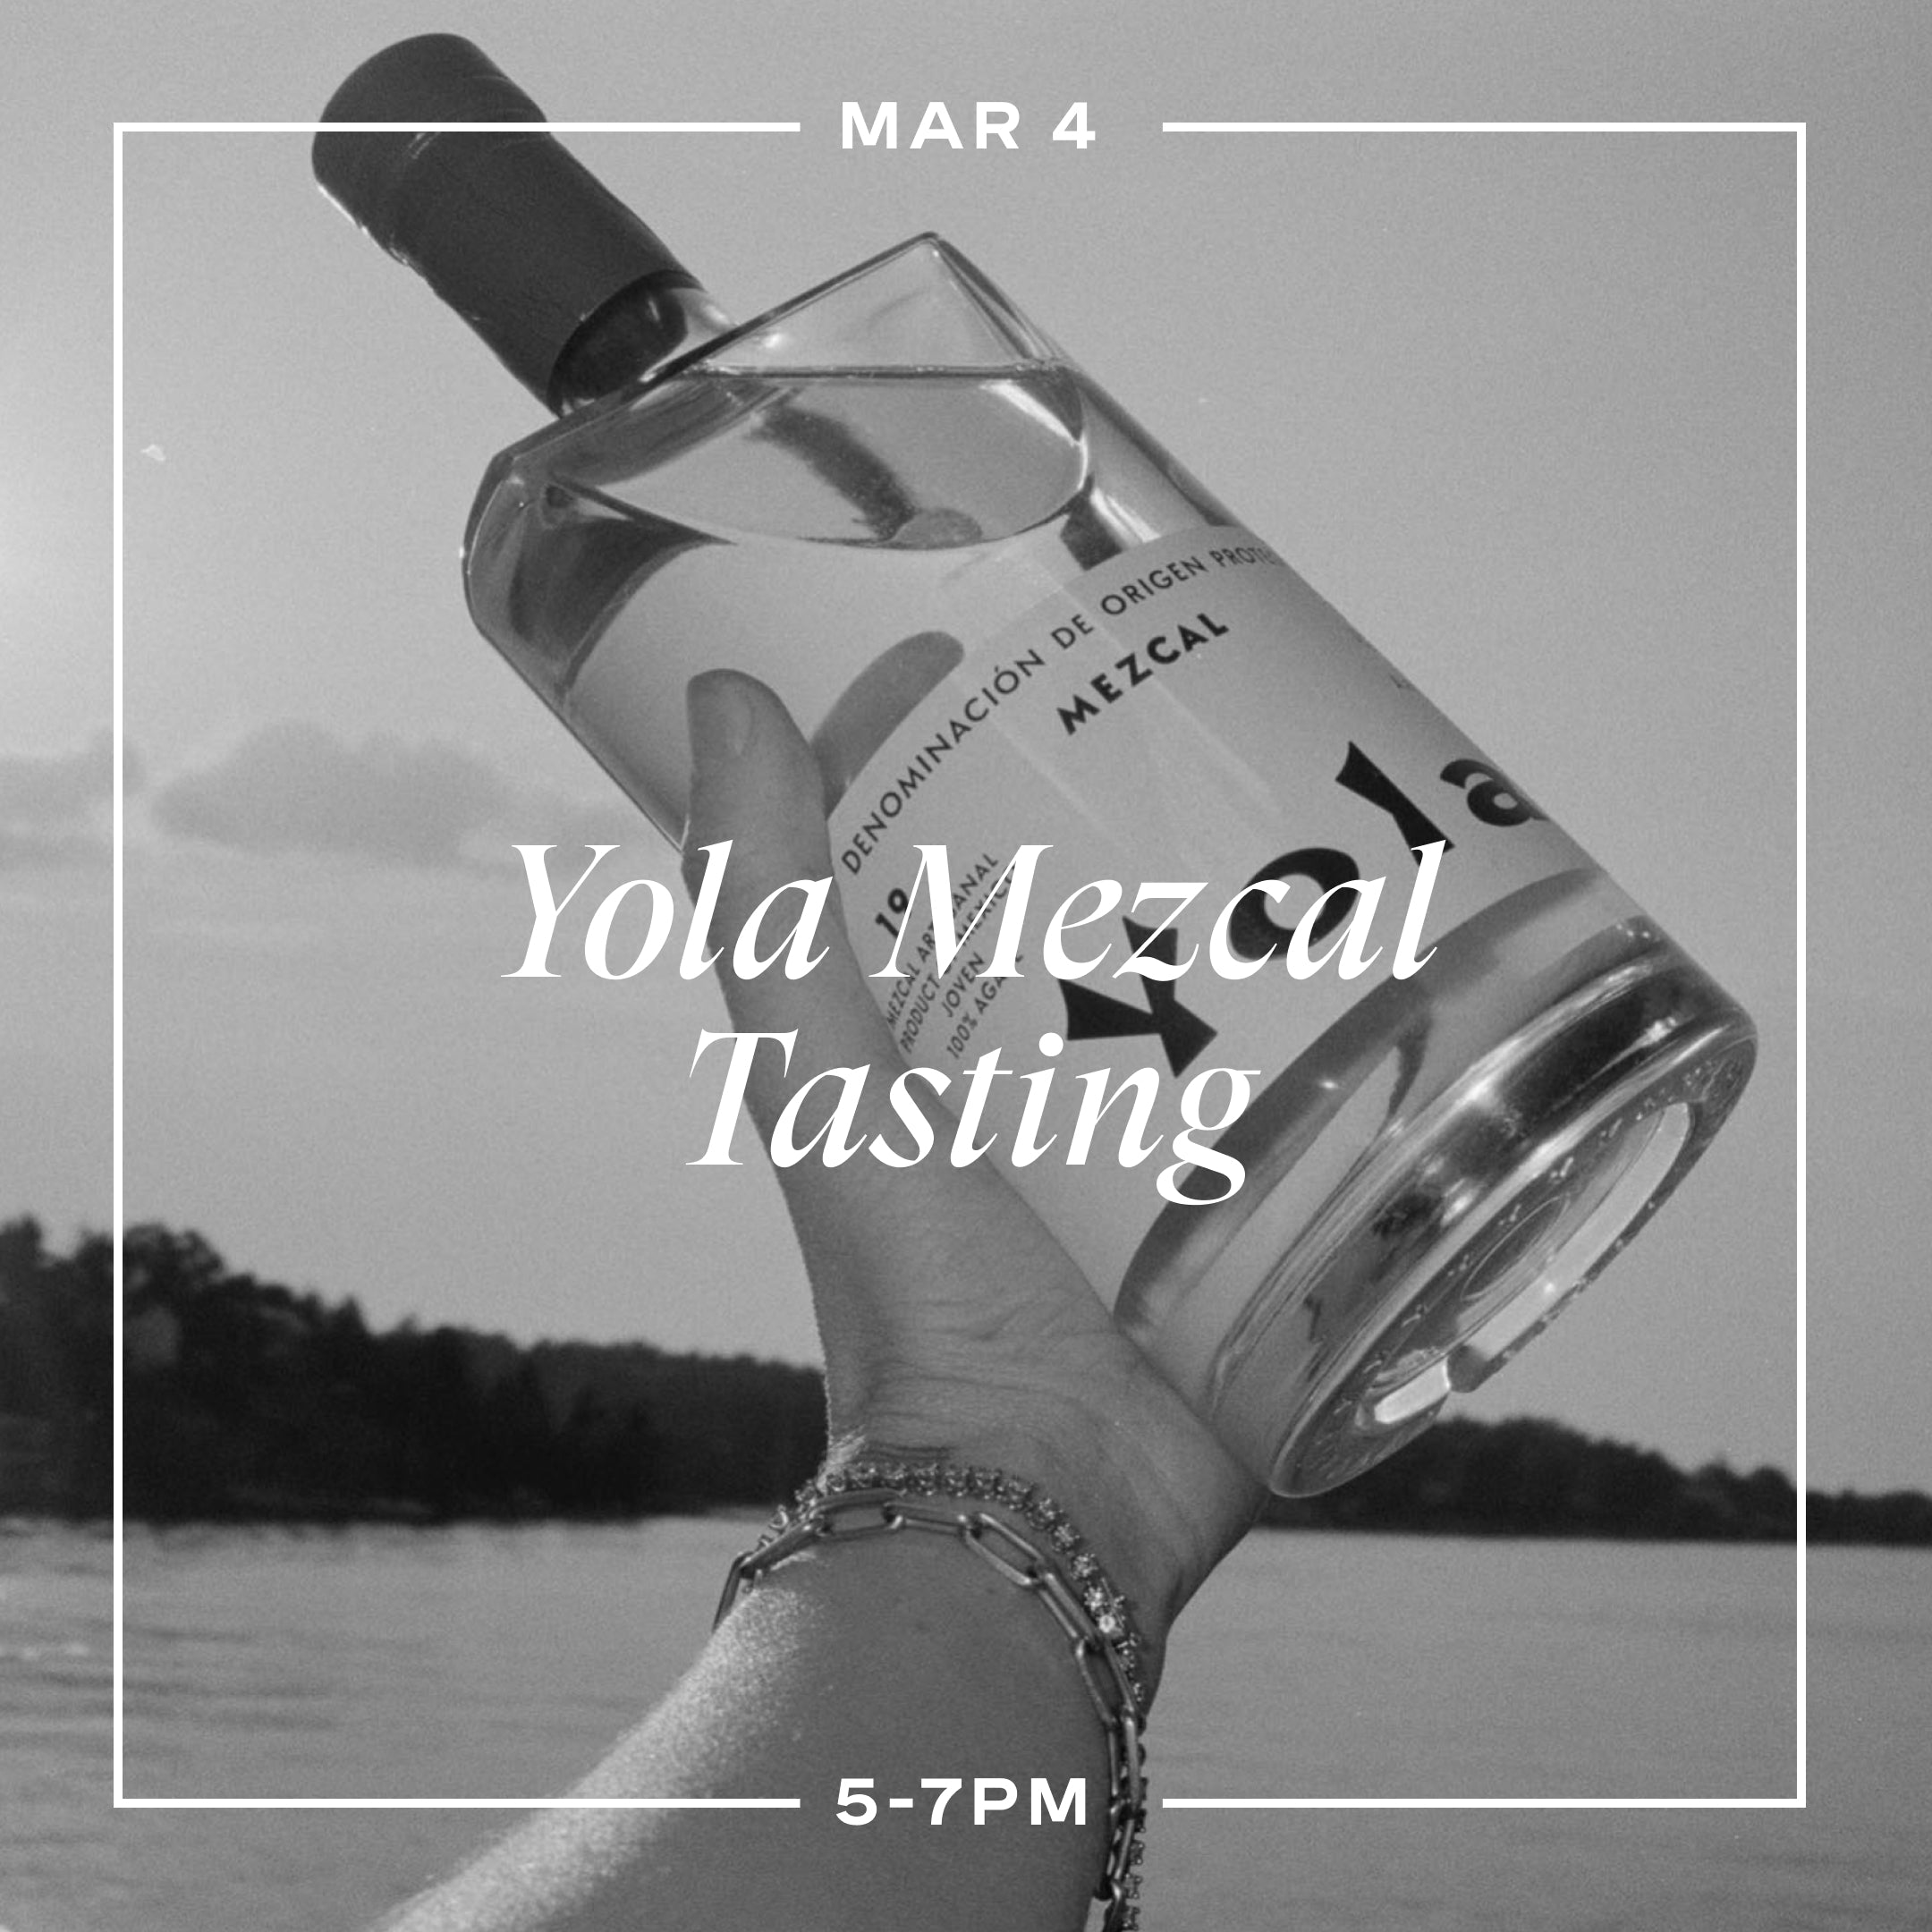 In-store tasting event with Yola Mezcal